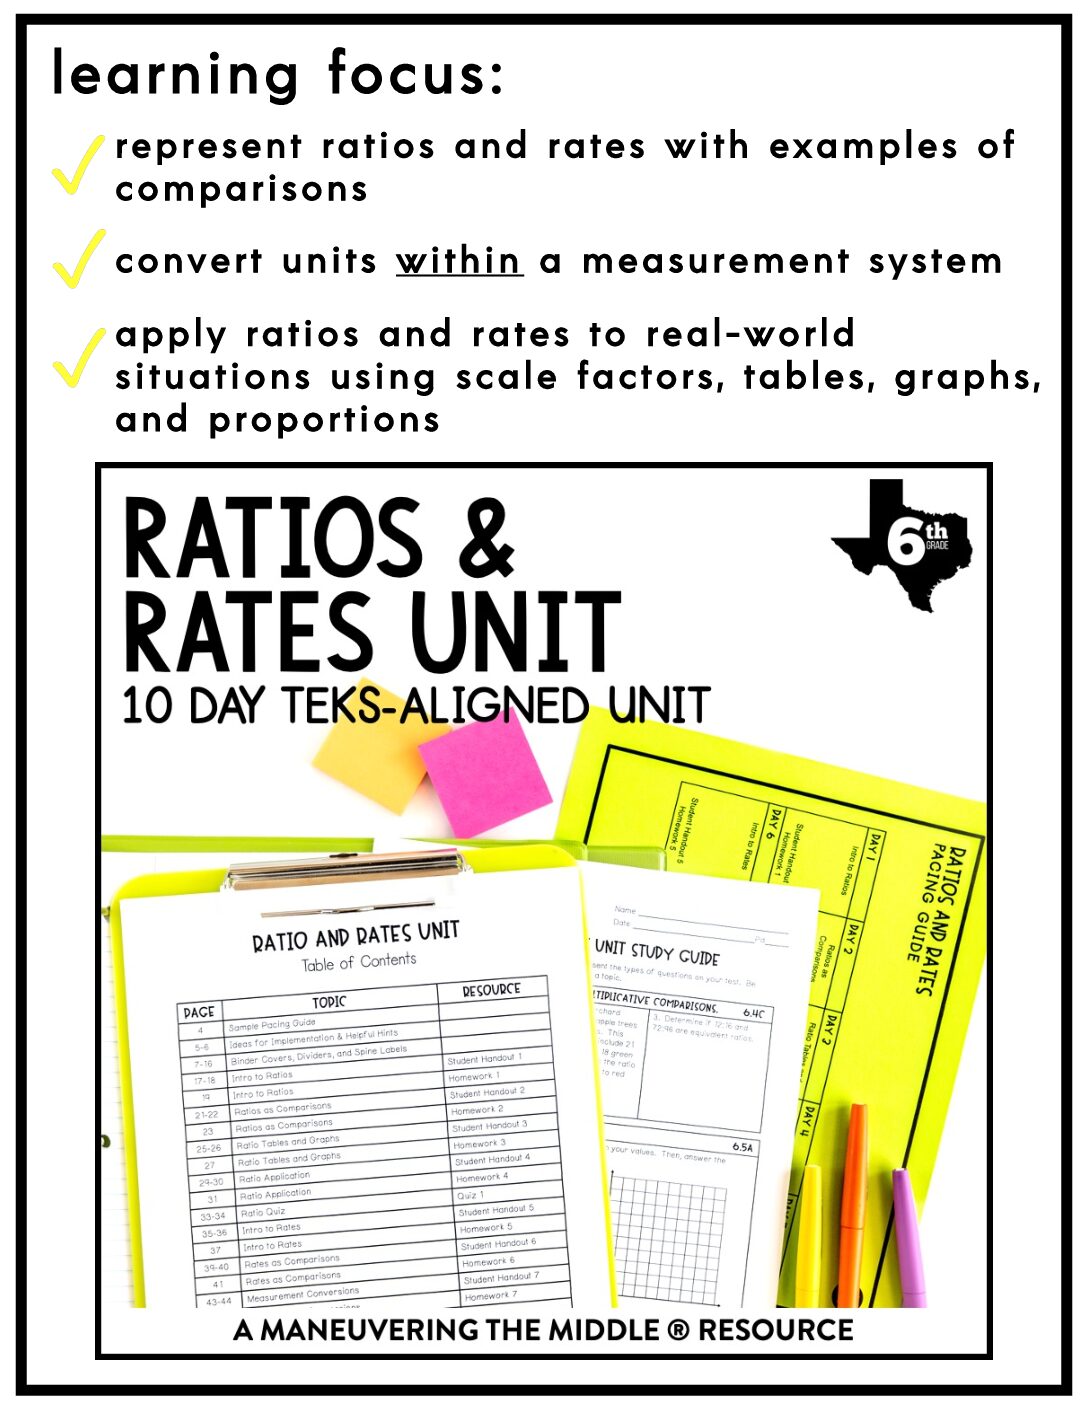 ratios-and-rates-unit-6th-grade-teks-maneuvering-the-middle